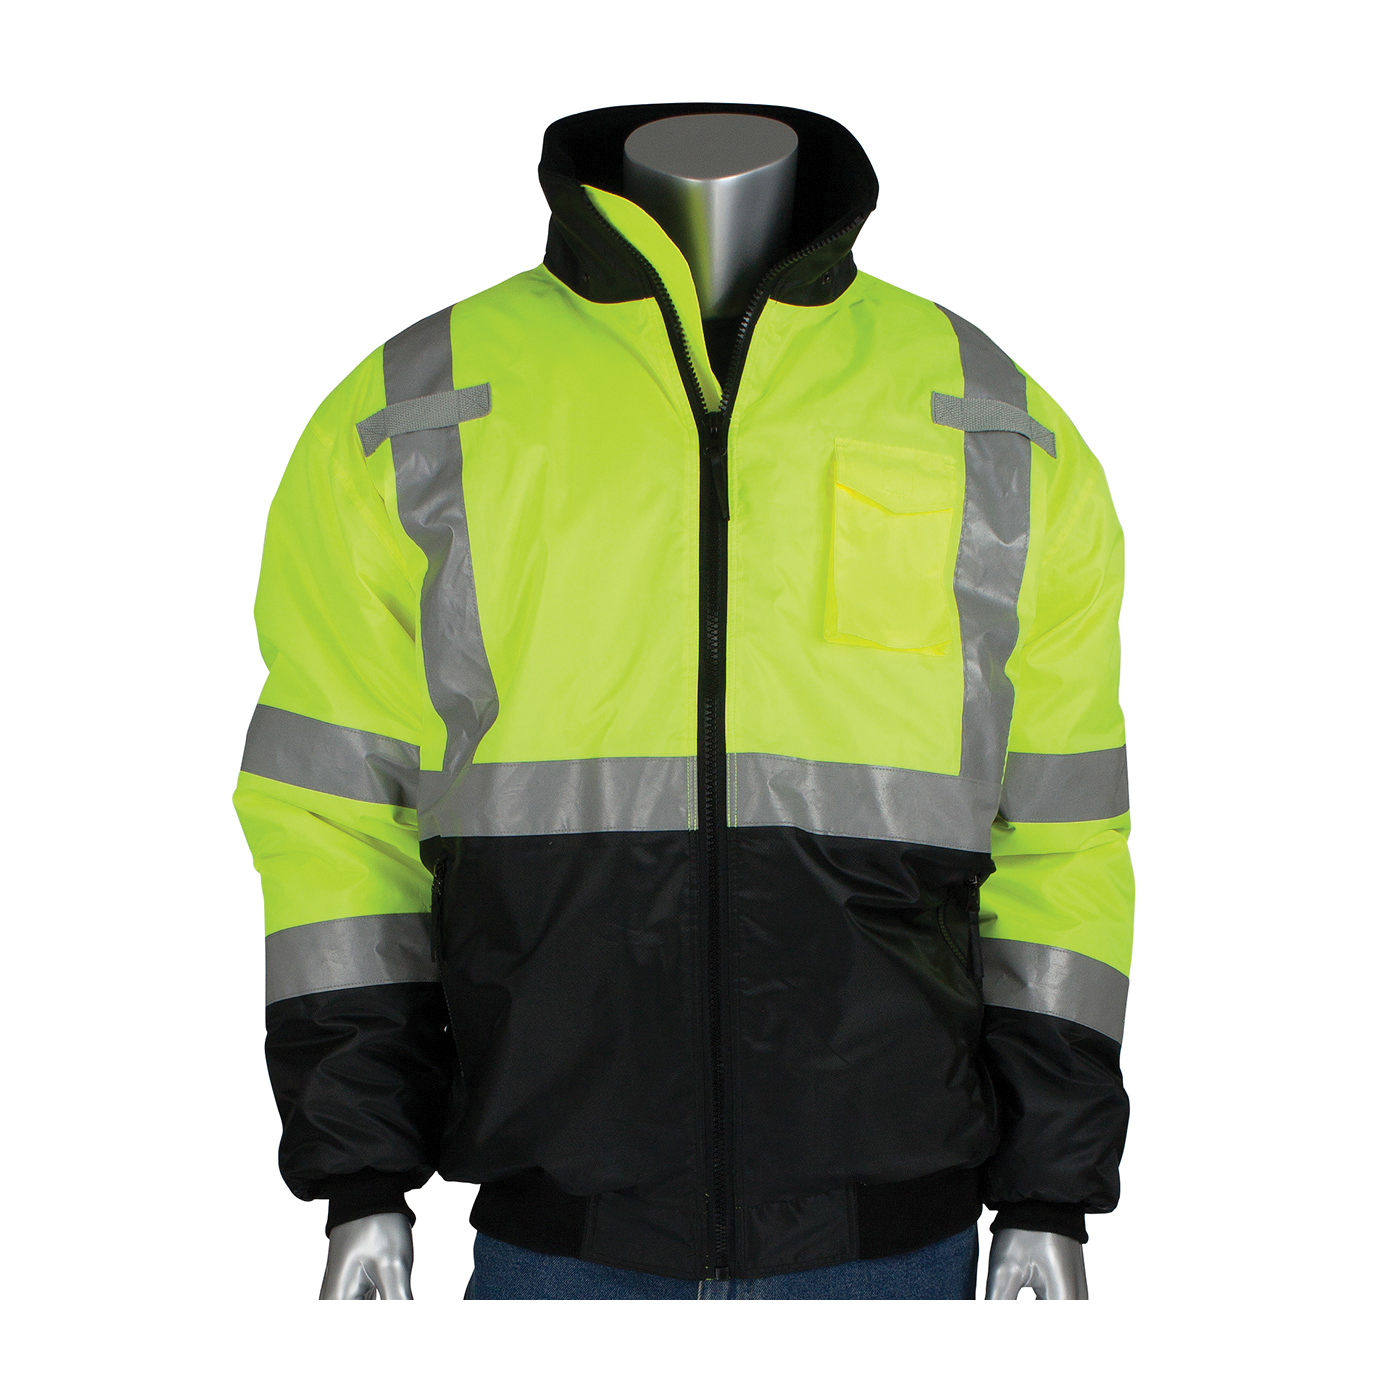 PIP® 333-1740-LY/4X Bomber Jacket, Black/Hi-Viz Lime Yellow, Polyester, 70 in Chest, Resists: Water, ANSI Type R Class 3